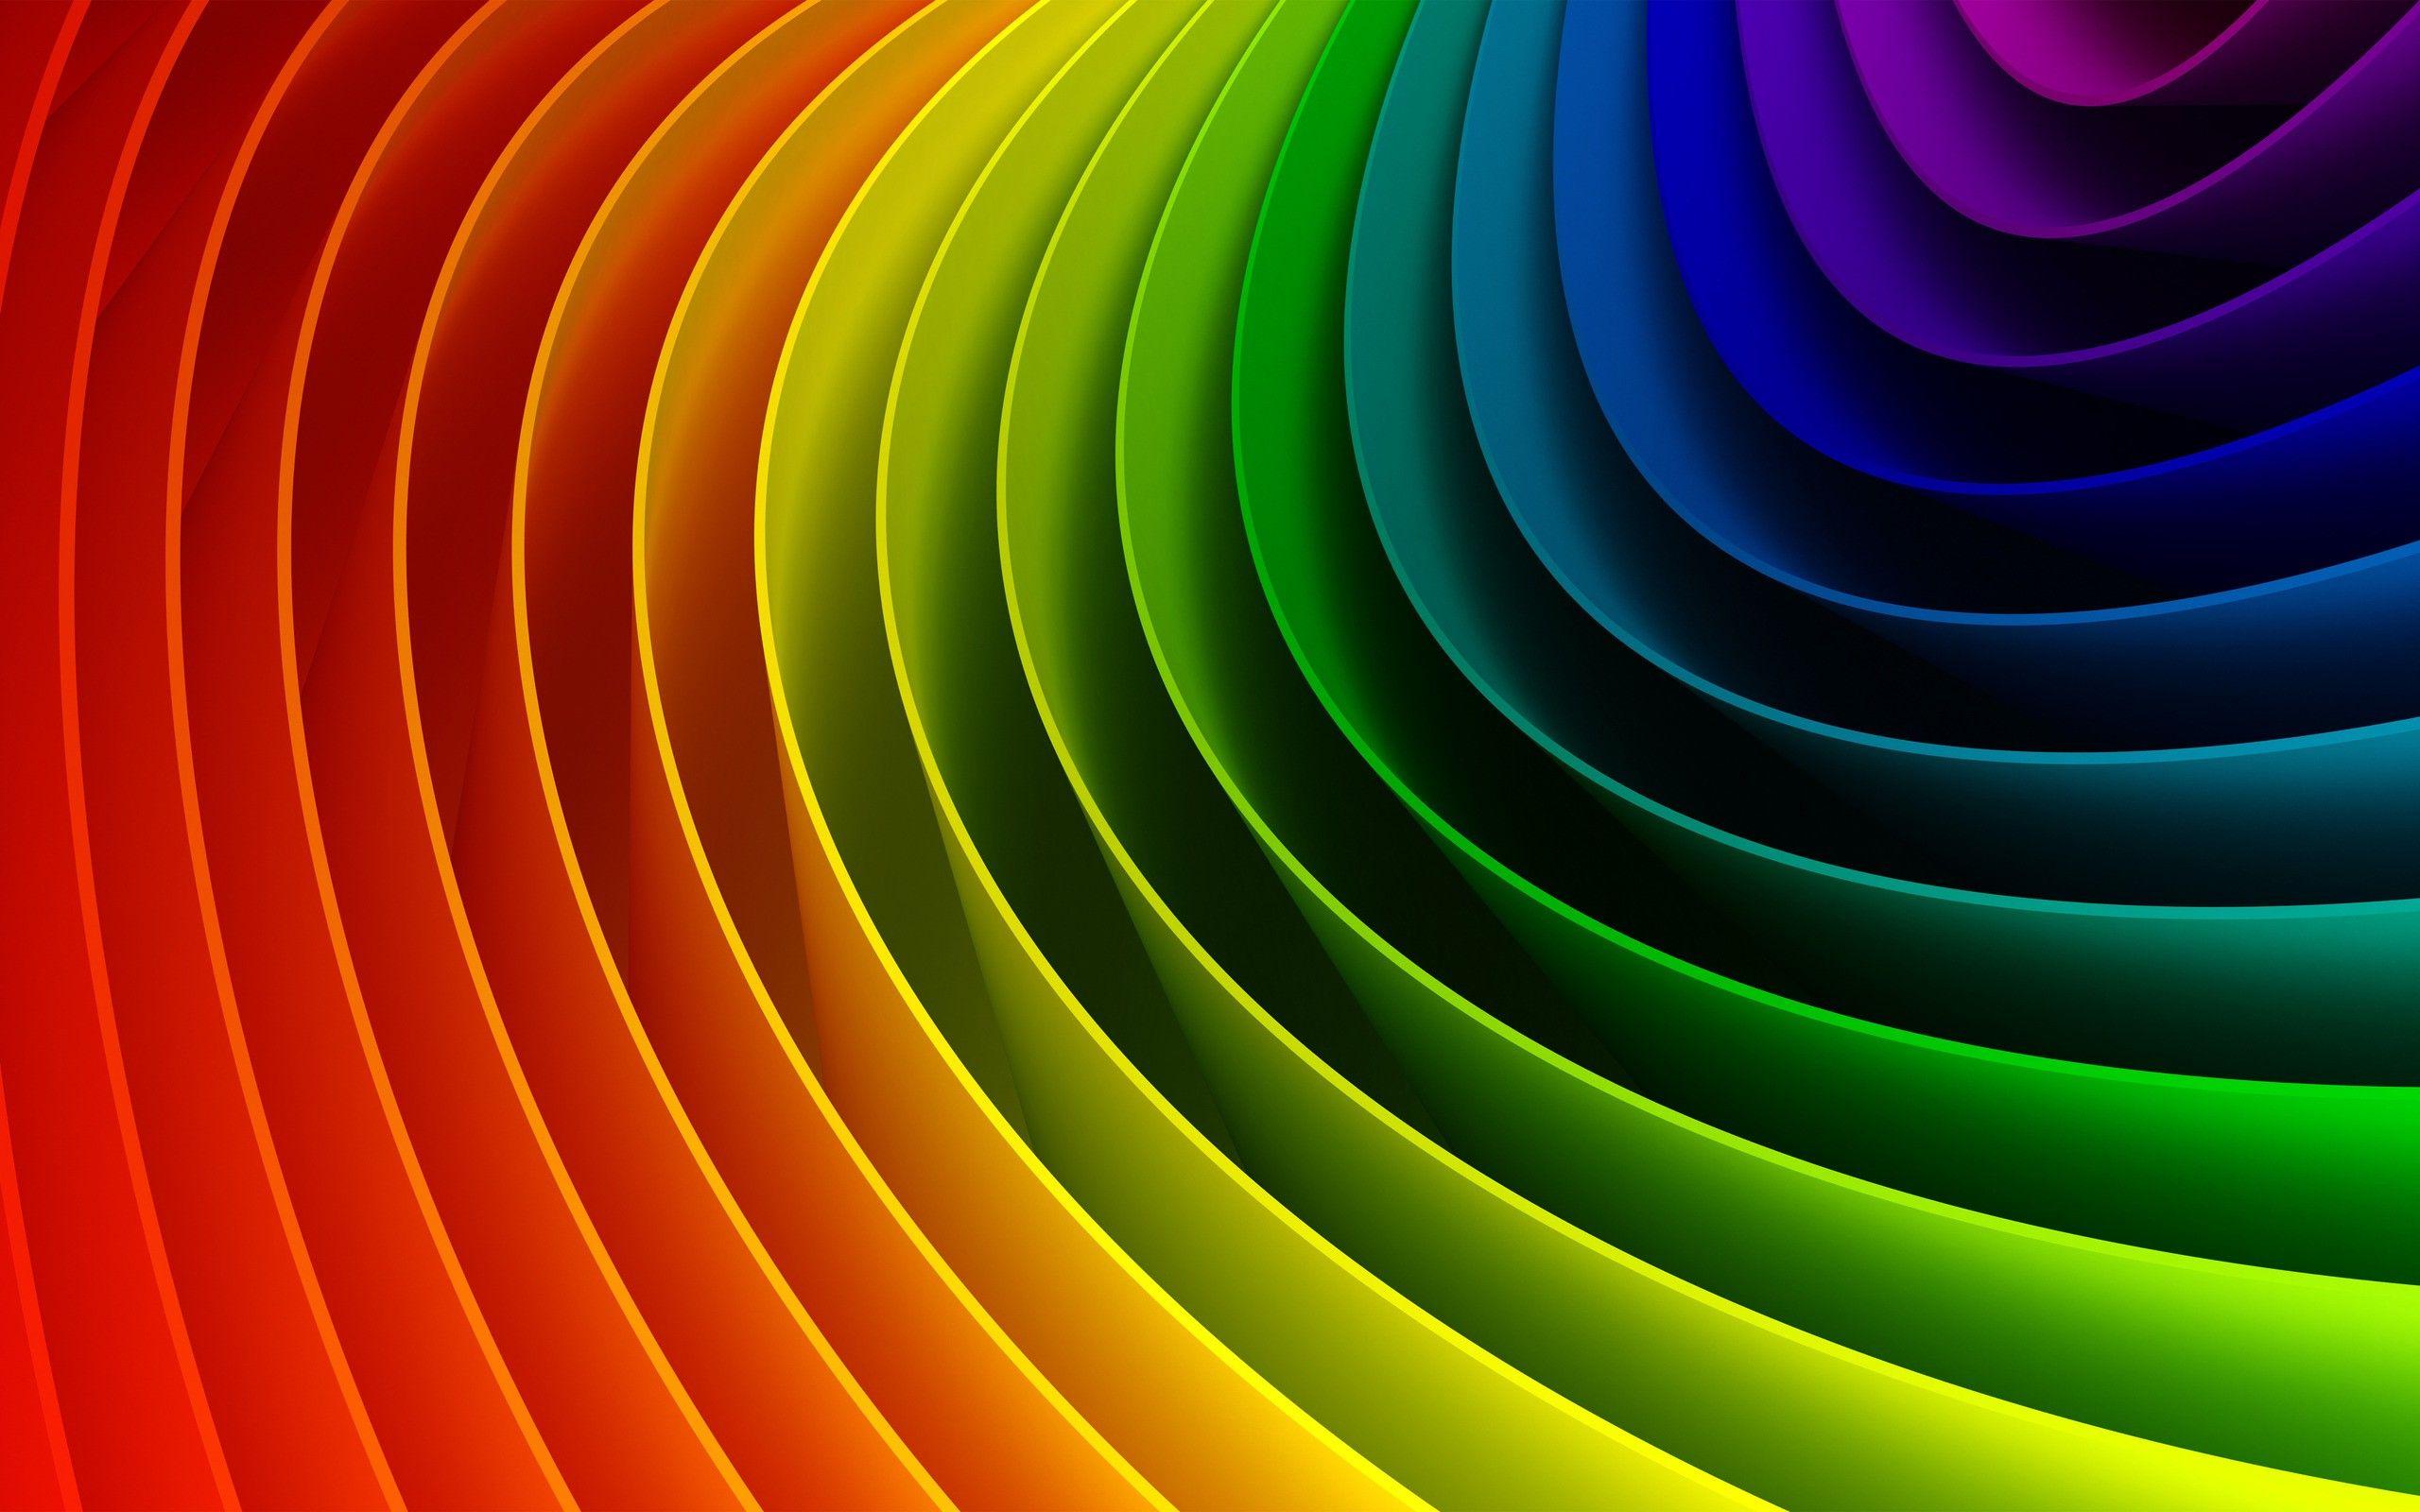 New 4K Ultra HD Wallpaper's Collection: Multi Colors View Wallpaper